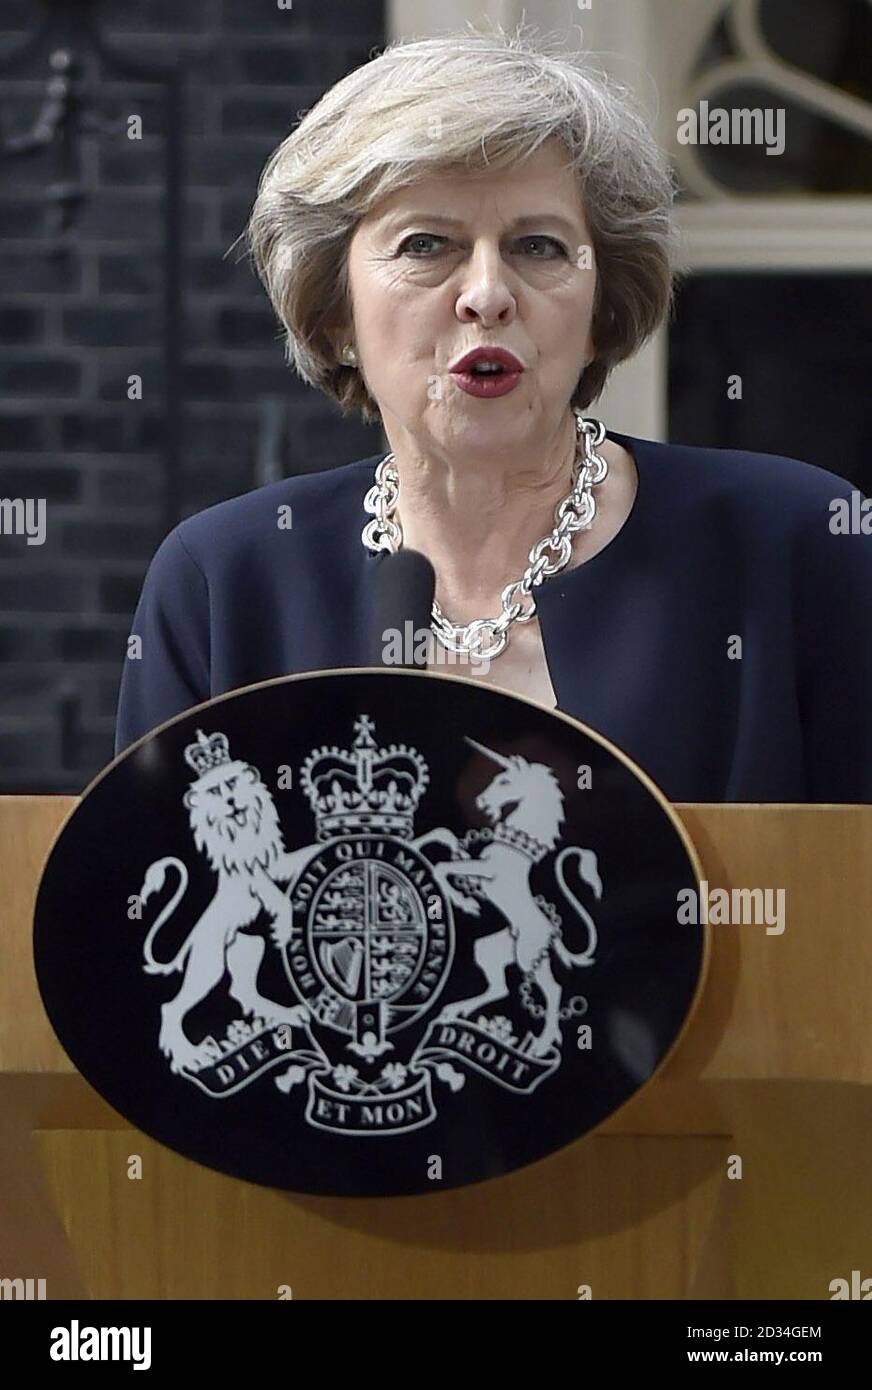 New Prime Minister Theresa May makes a speech outside 10 Downing Street, London, after meeting Queen Elizabeth II and accepting her invitation to become Prime Minister and form a new government. Stock Photo